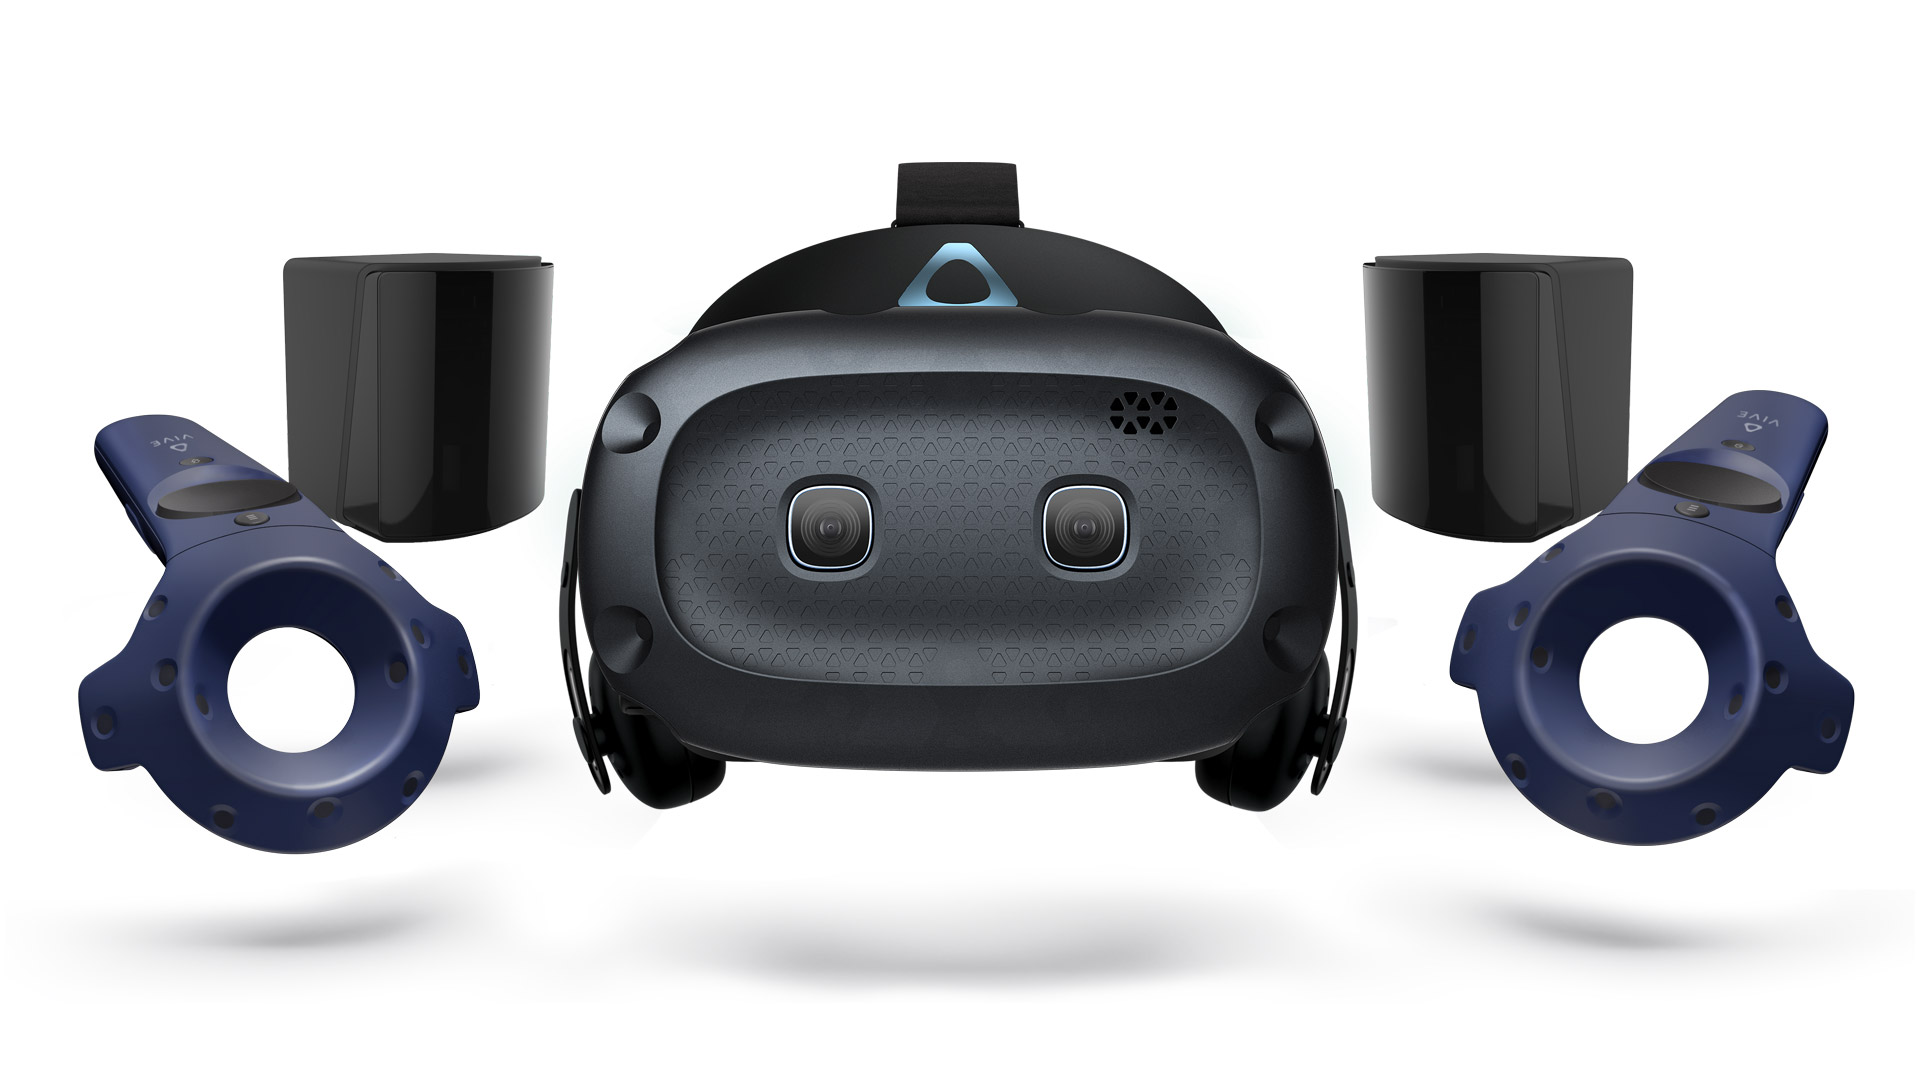 can you use vive trackers with oculus rift s